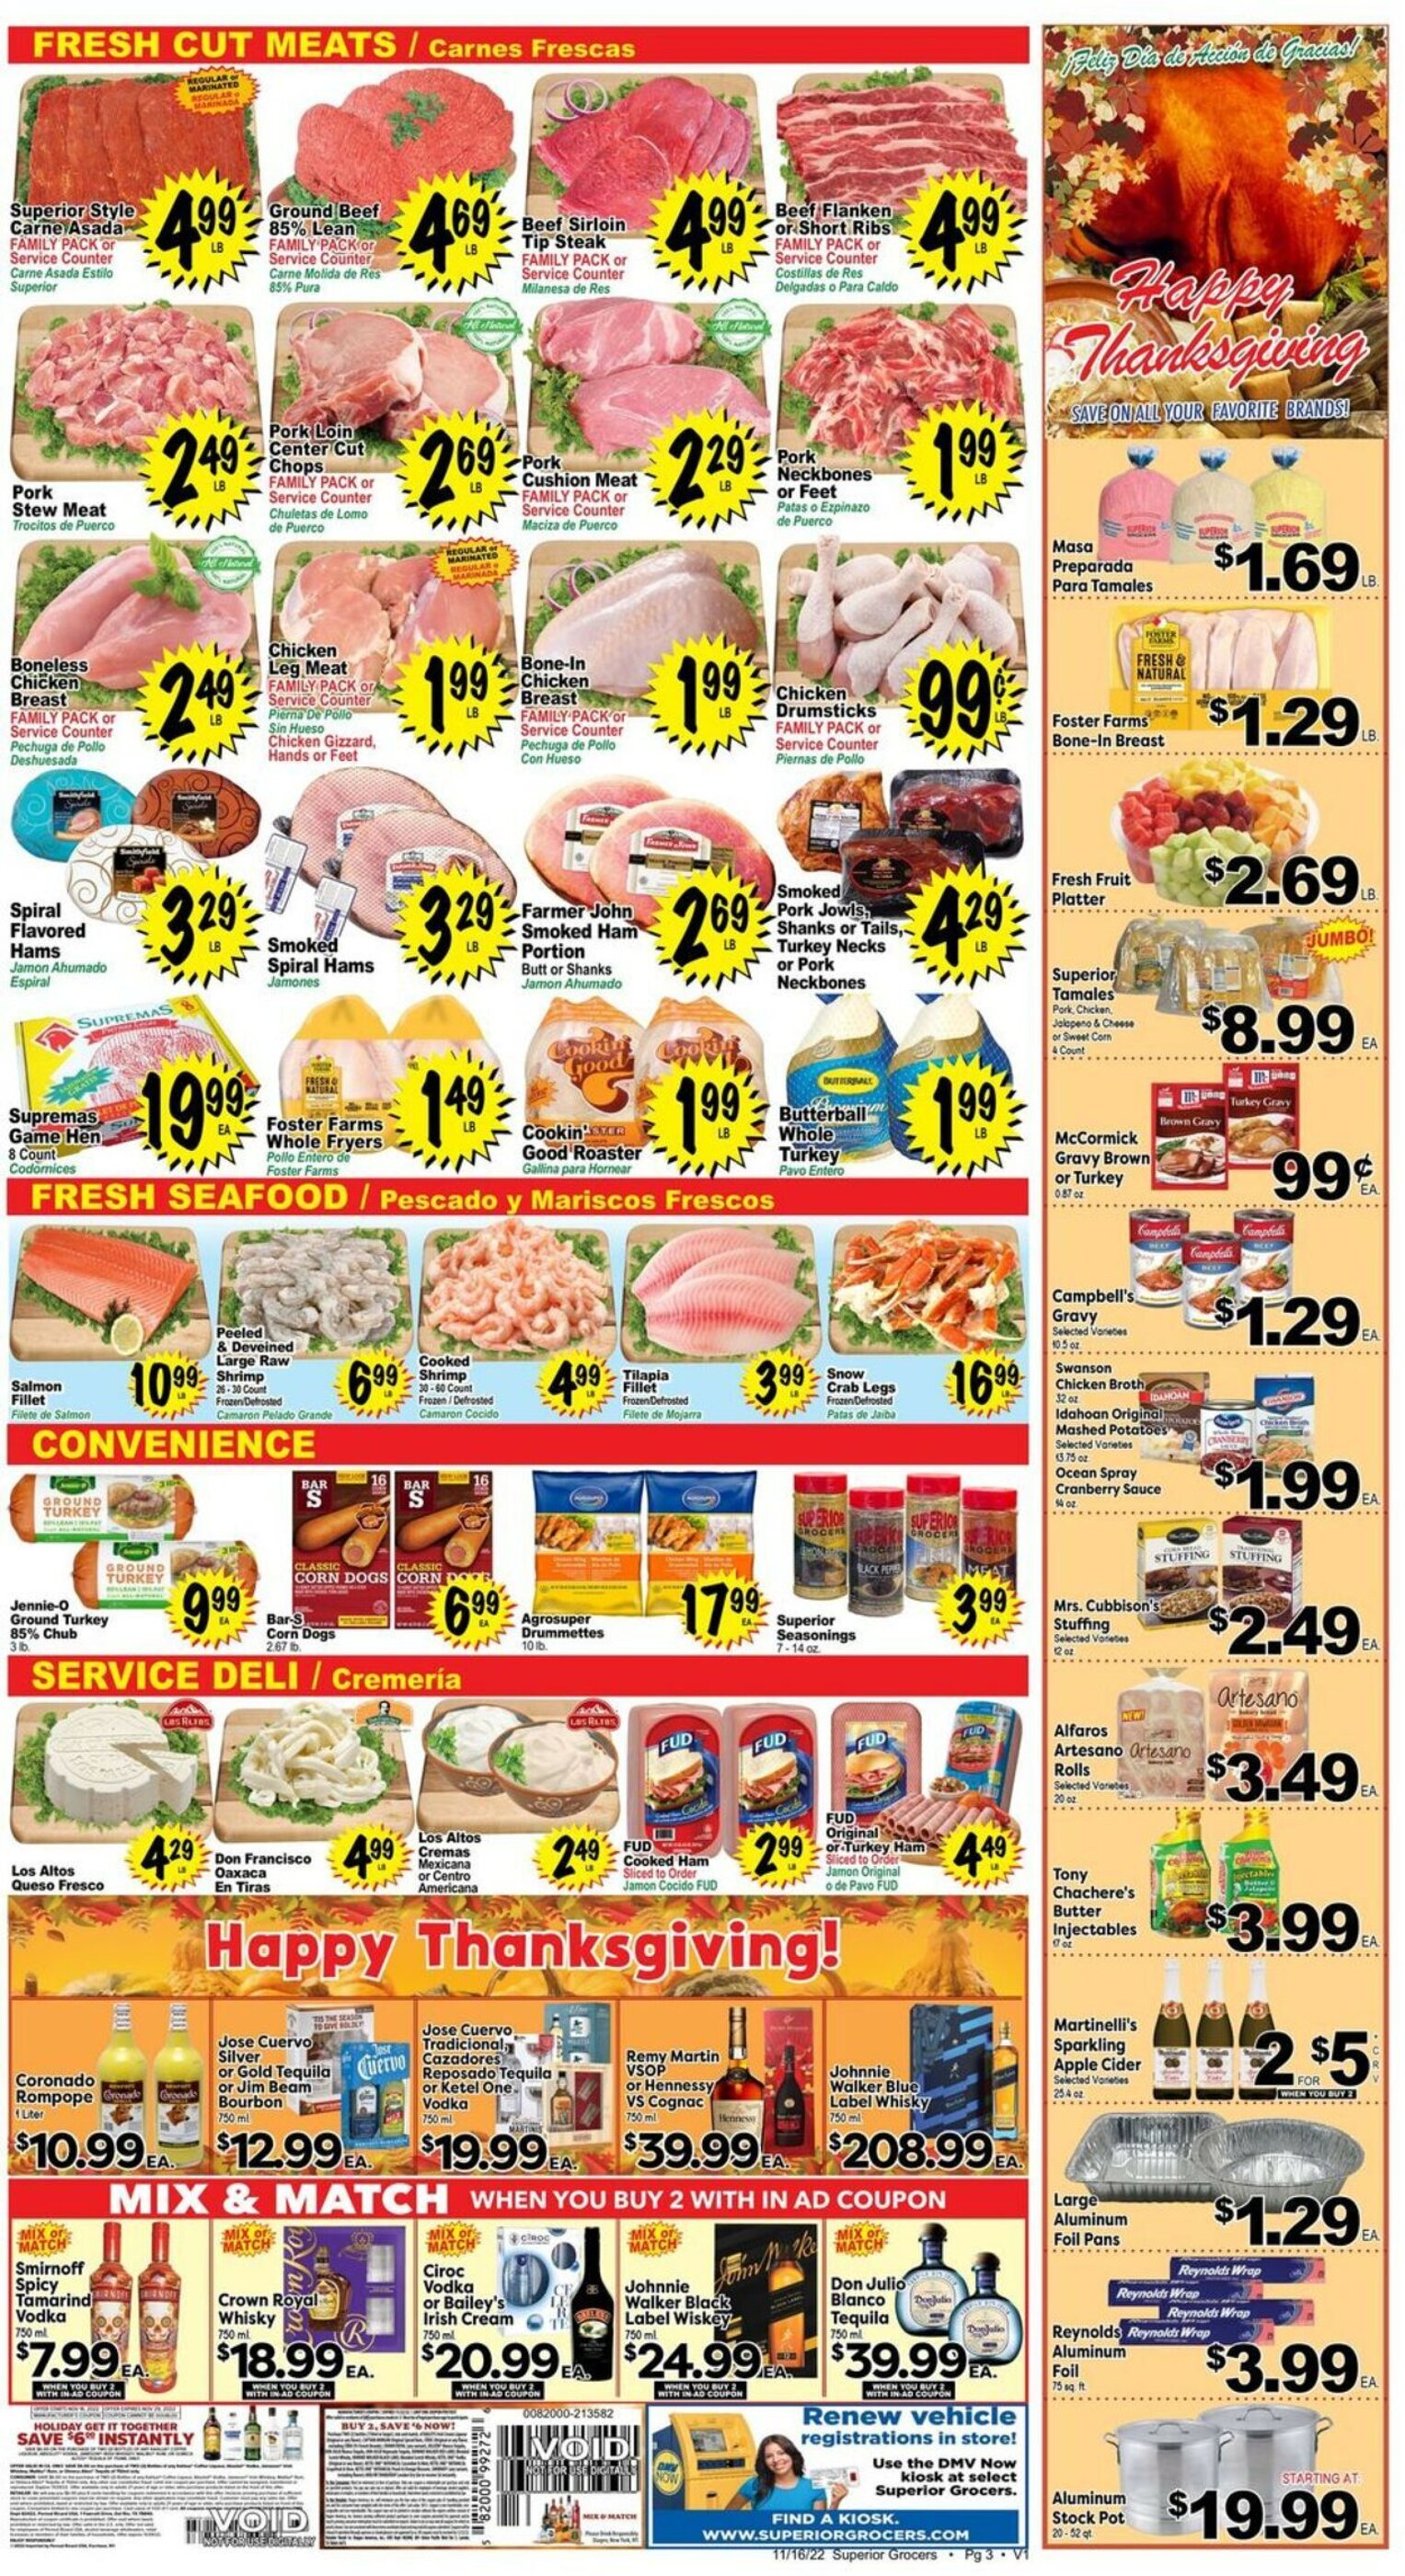 Superior Grocers Weekly Ad Preview: (November 16 - November 22 2022)